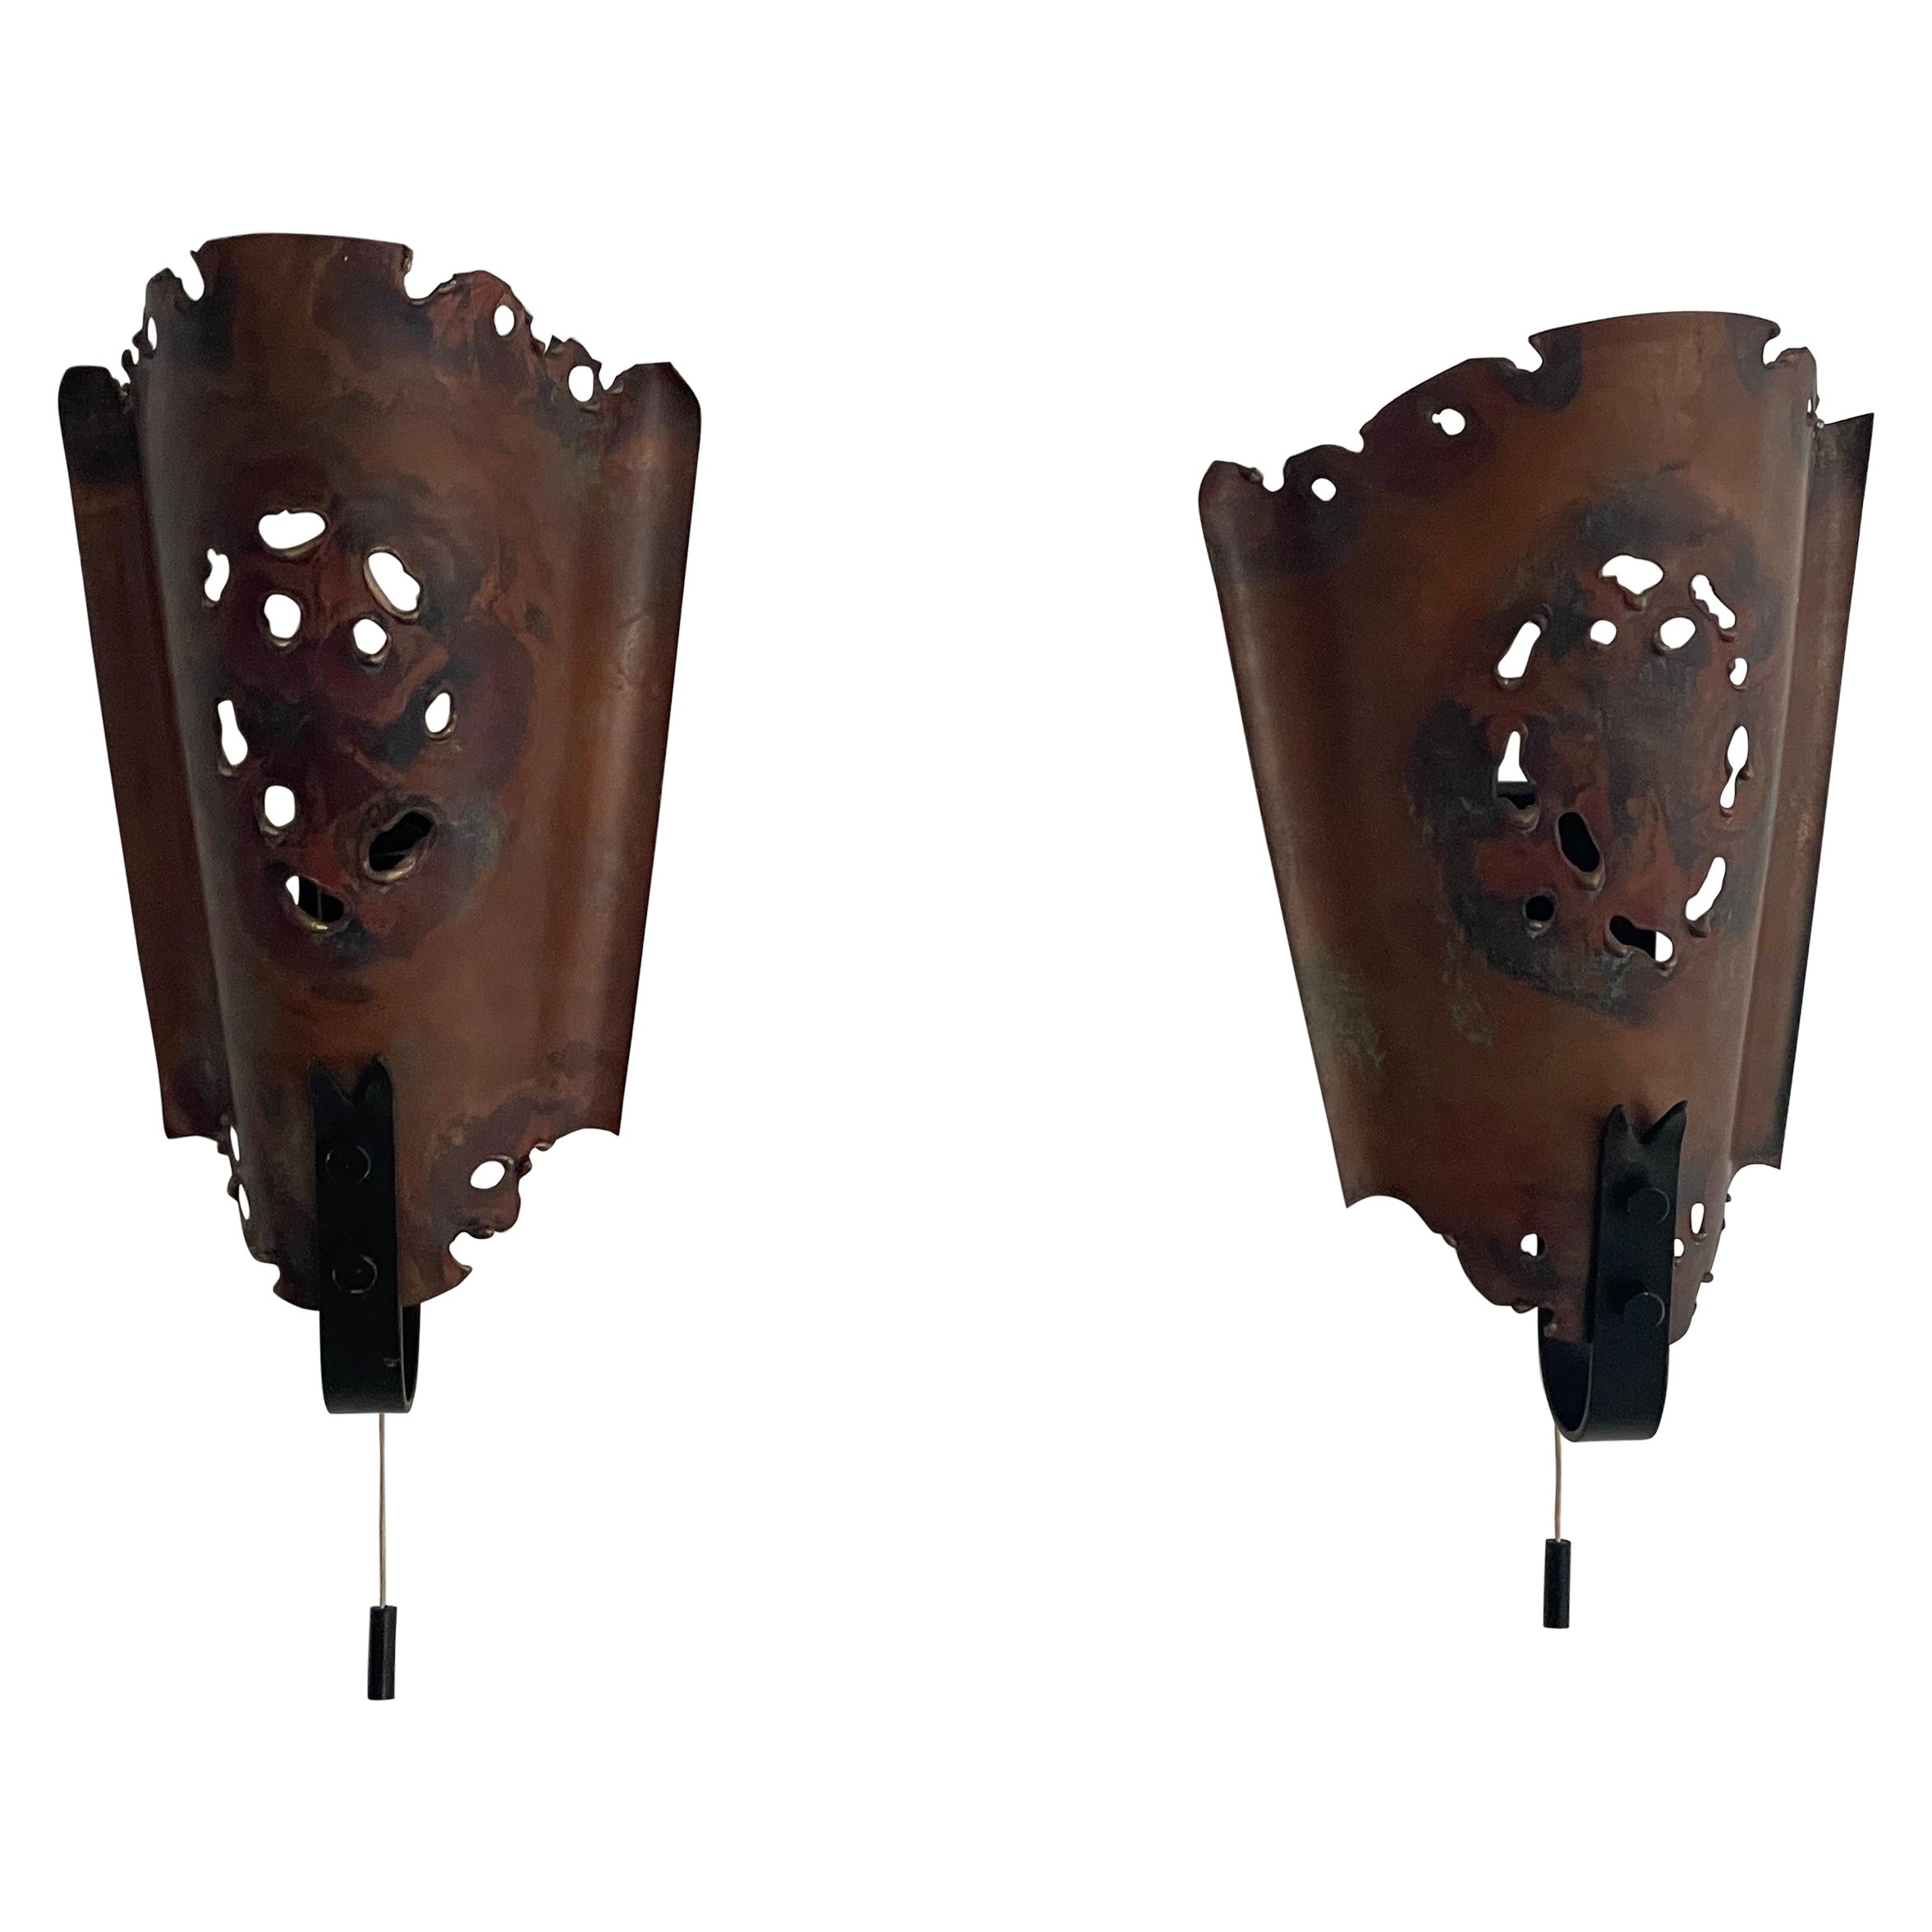 Brutalist Style Copper Pair of Sconces, 1960s, Germany